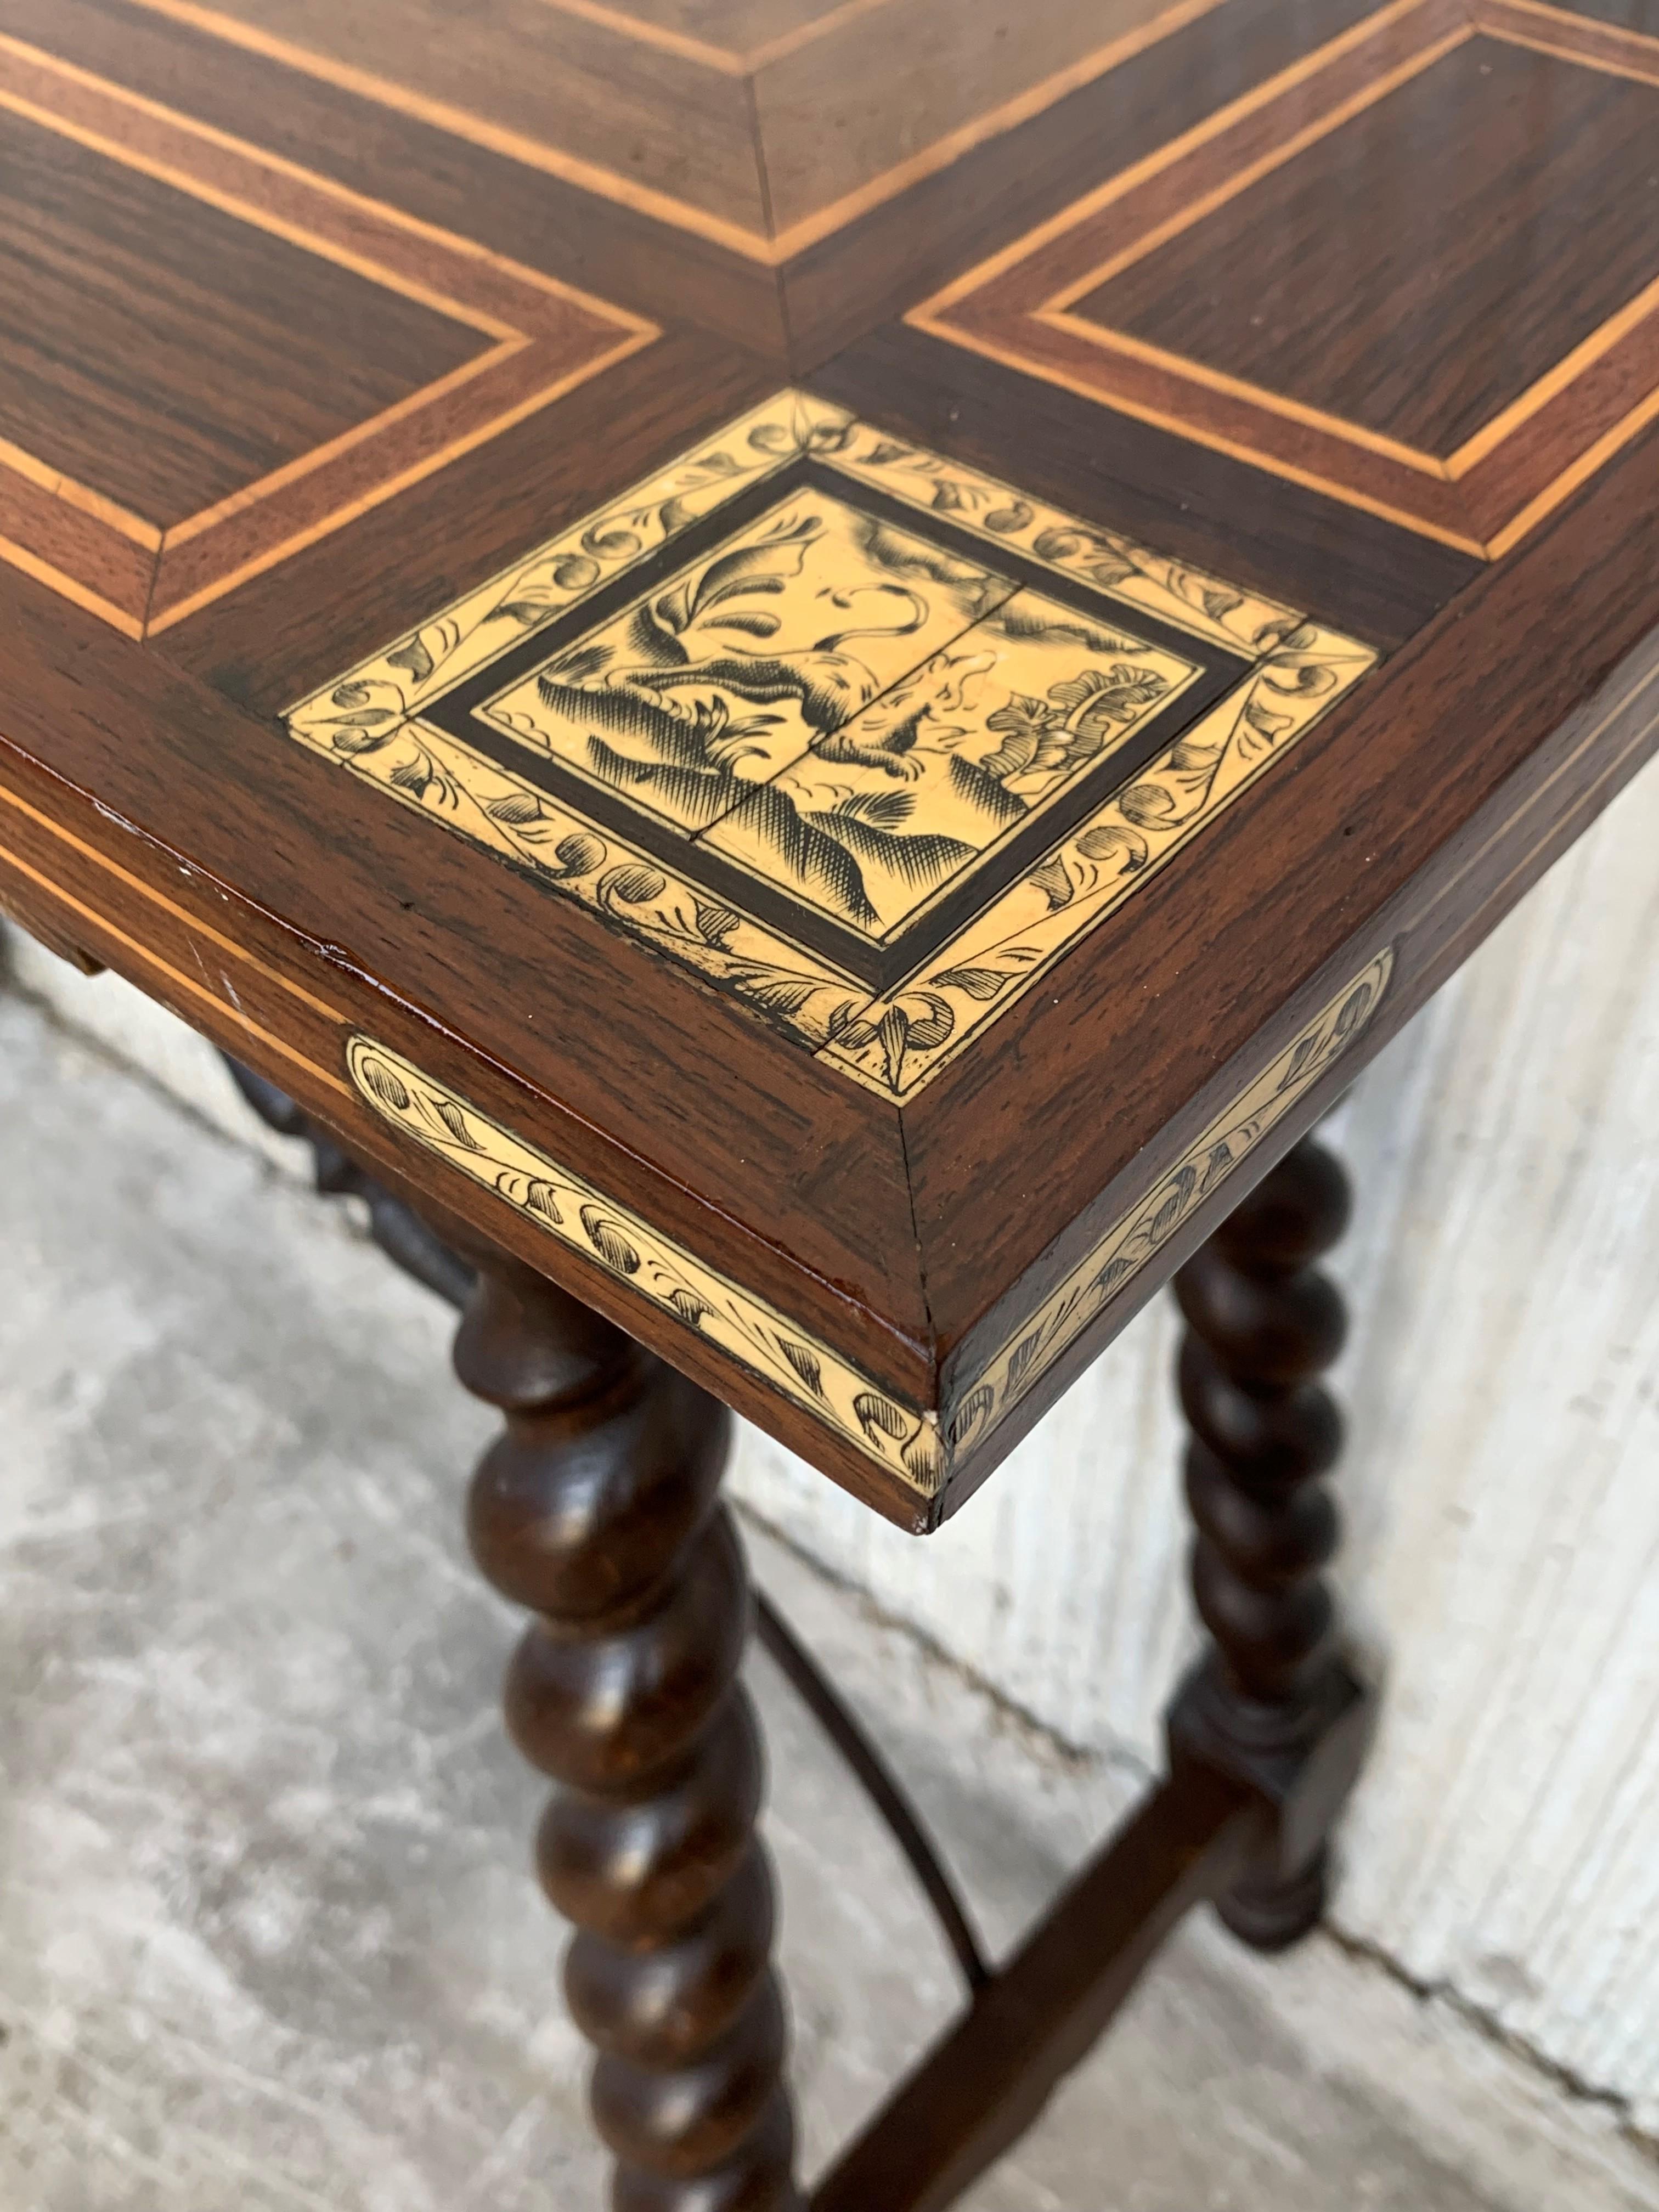 19th Century Salomonic Baroque Side Table with Inlays, Marquetry & Stretchers 3